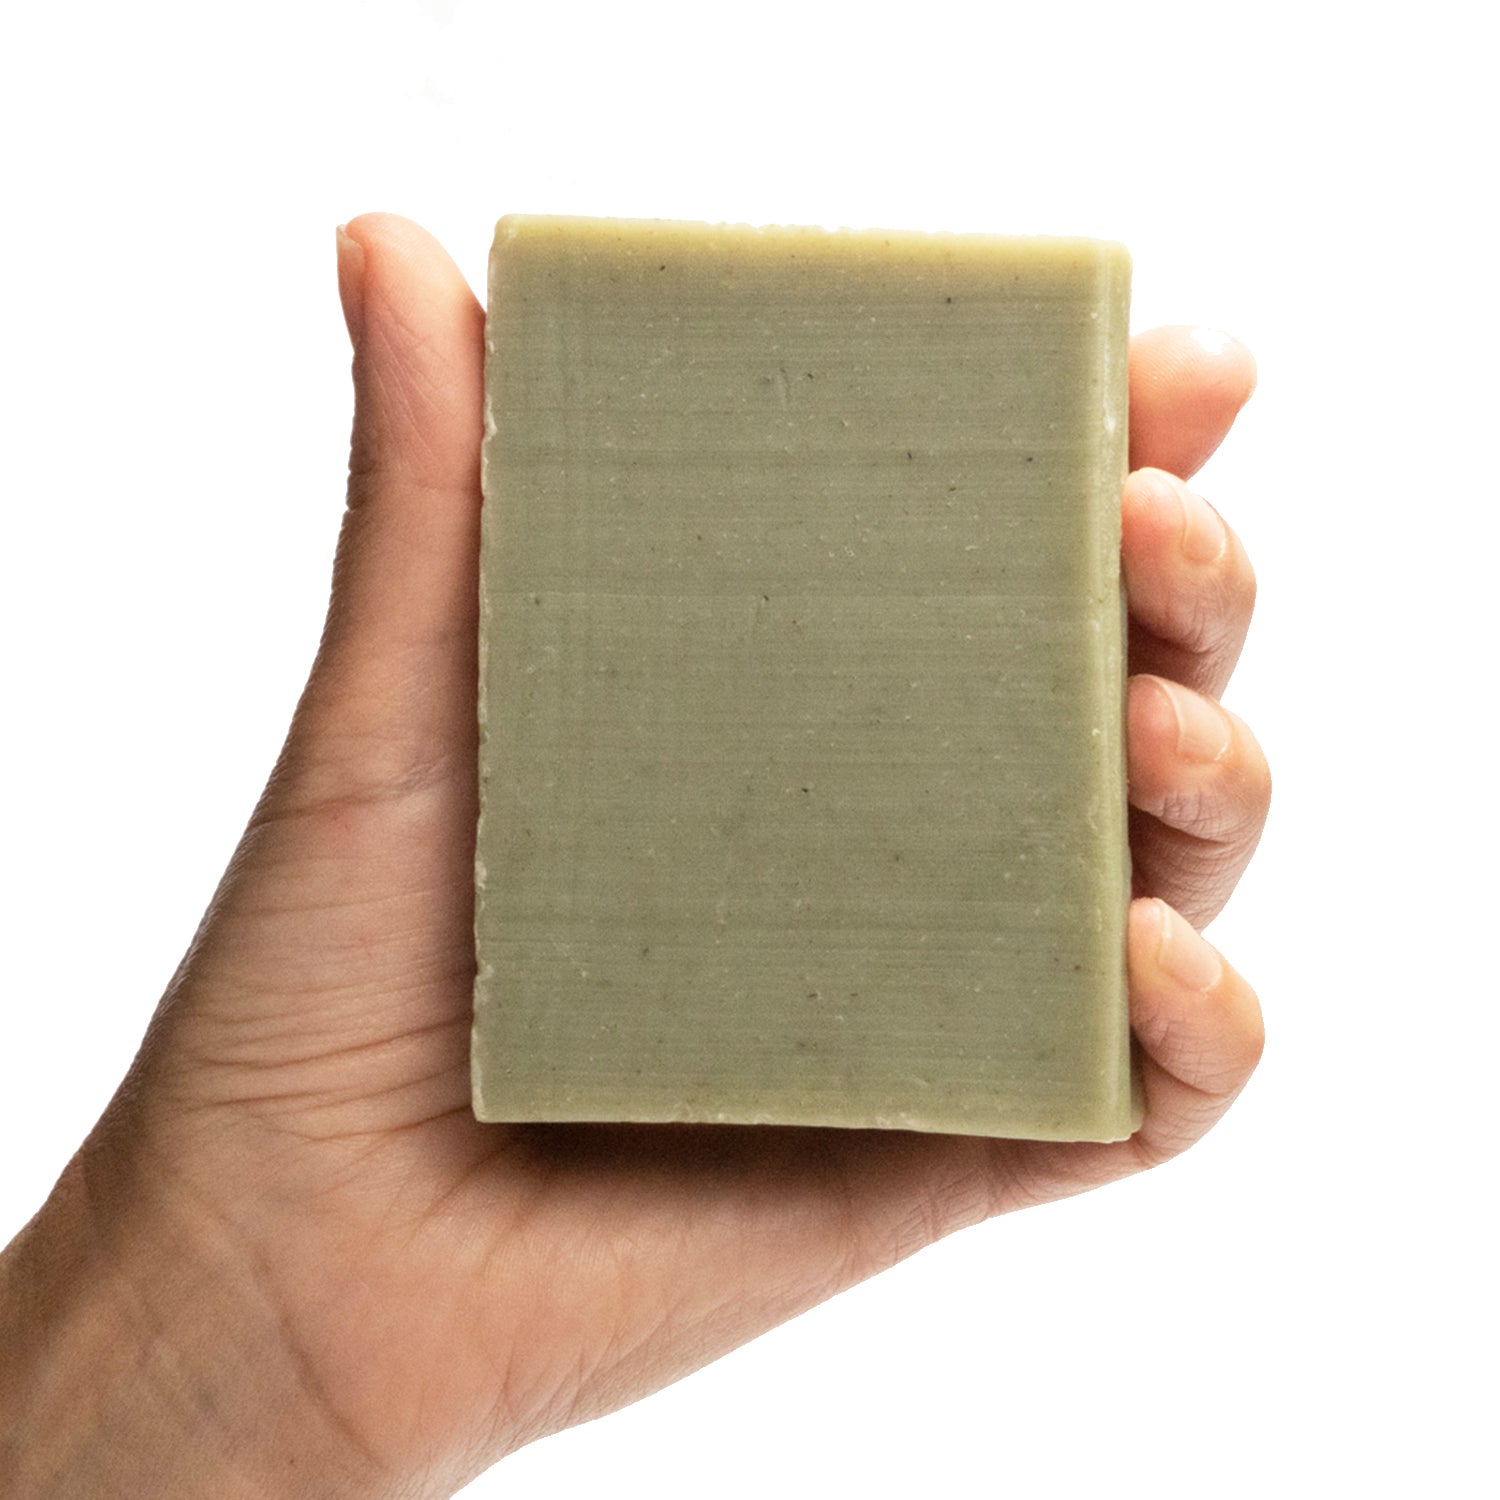 A naked bar of "Grove" cedar & pine essential oil and rhassoul clay organic bar soap from ground Soap in a hand.